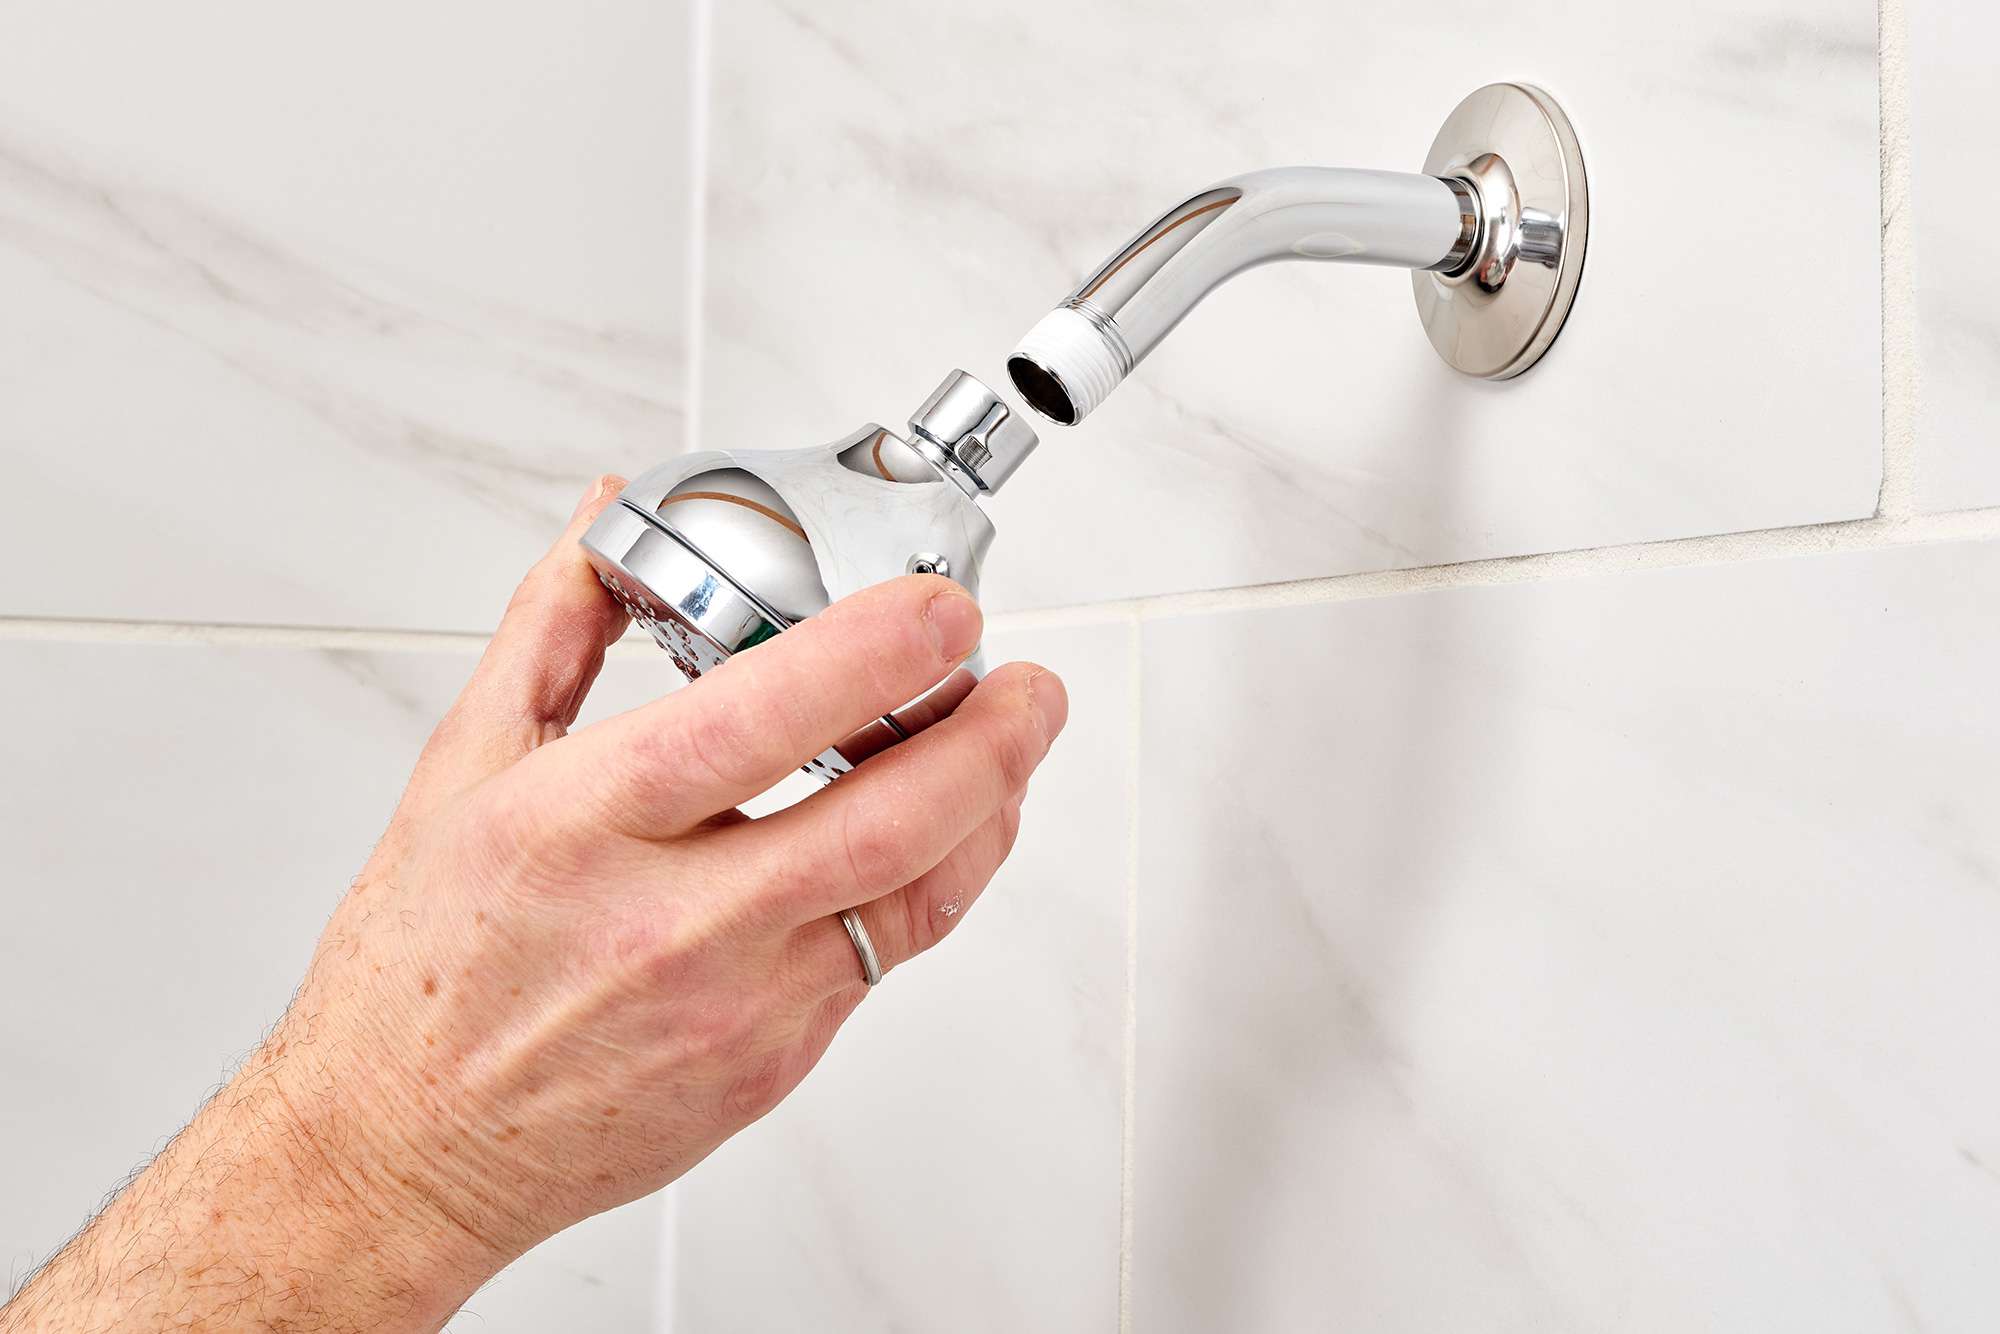 How To Remove Showerhead Without Wrench